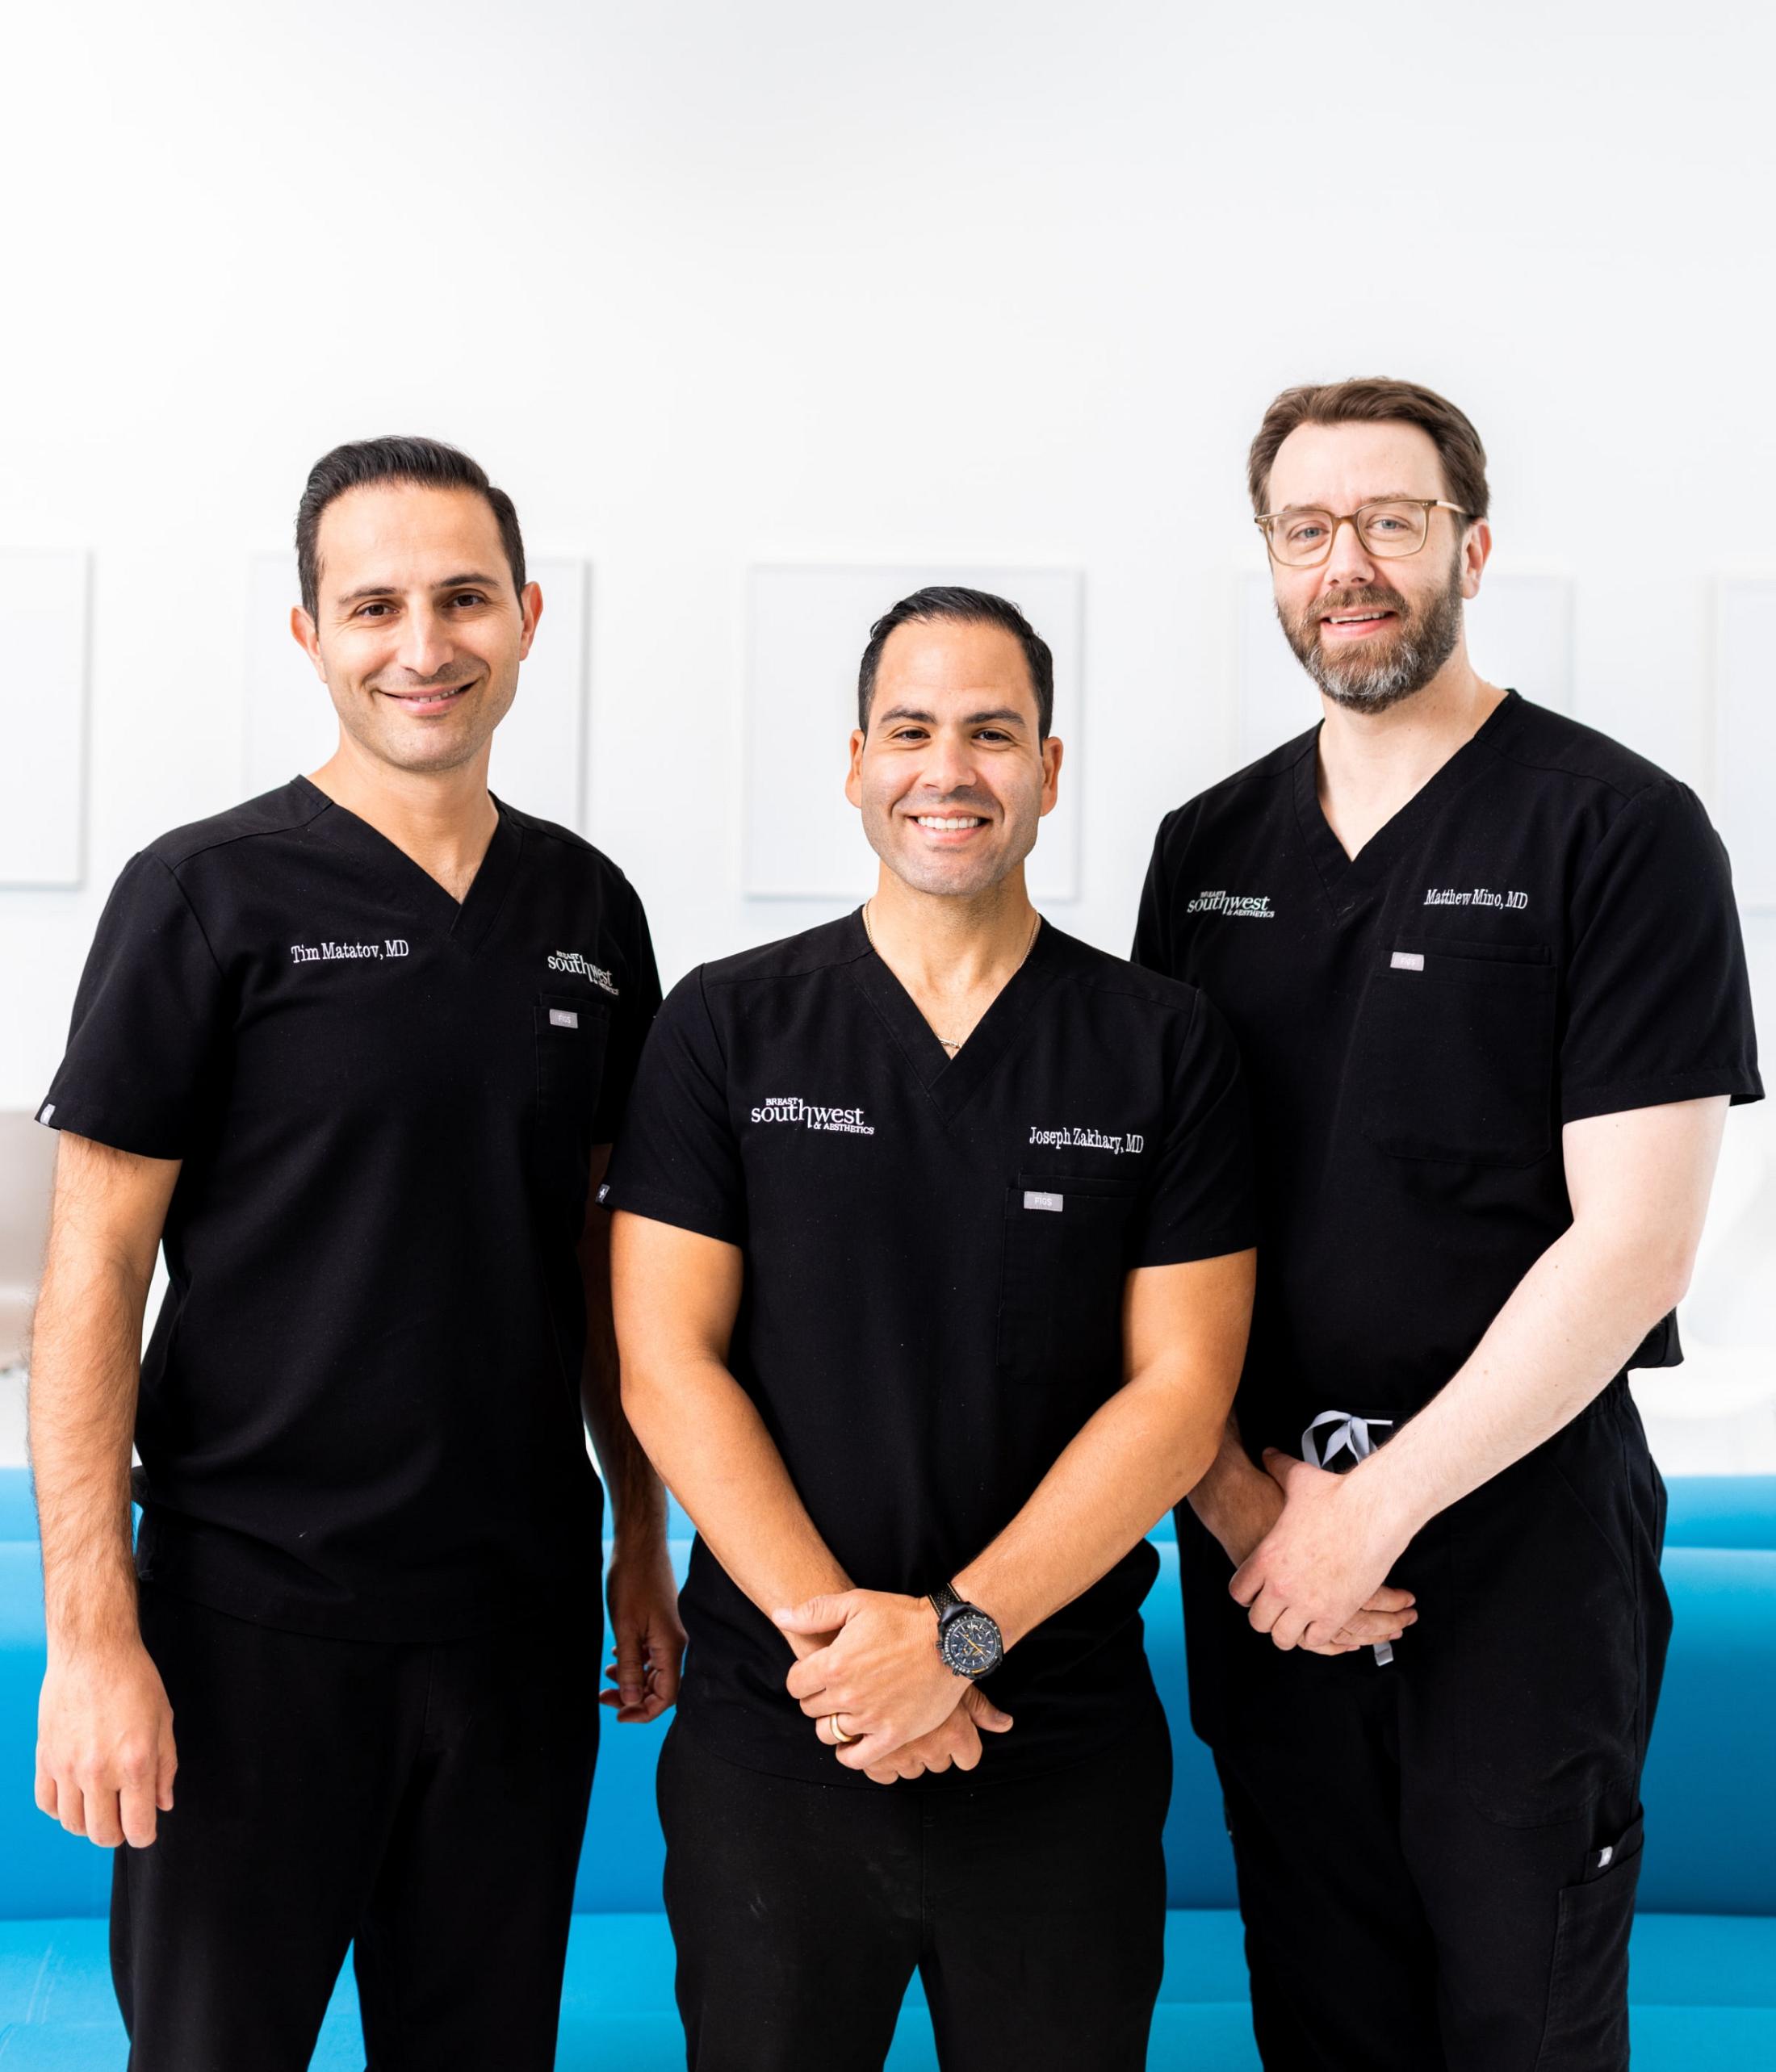 Phoenix Breast Reconstruction experts Dr. Matatov, Dr. Zakhary, and Dr. Mino